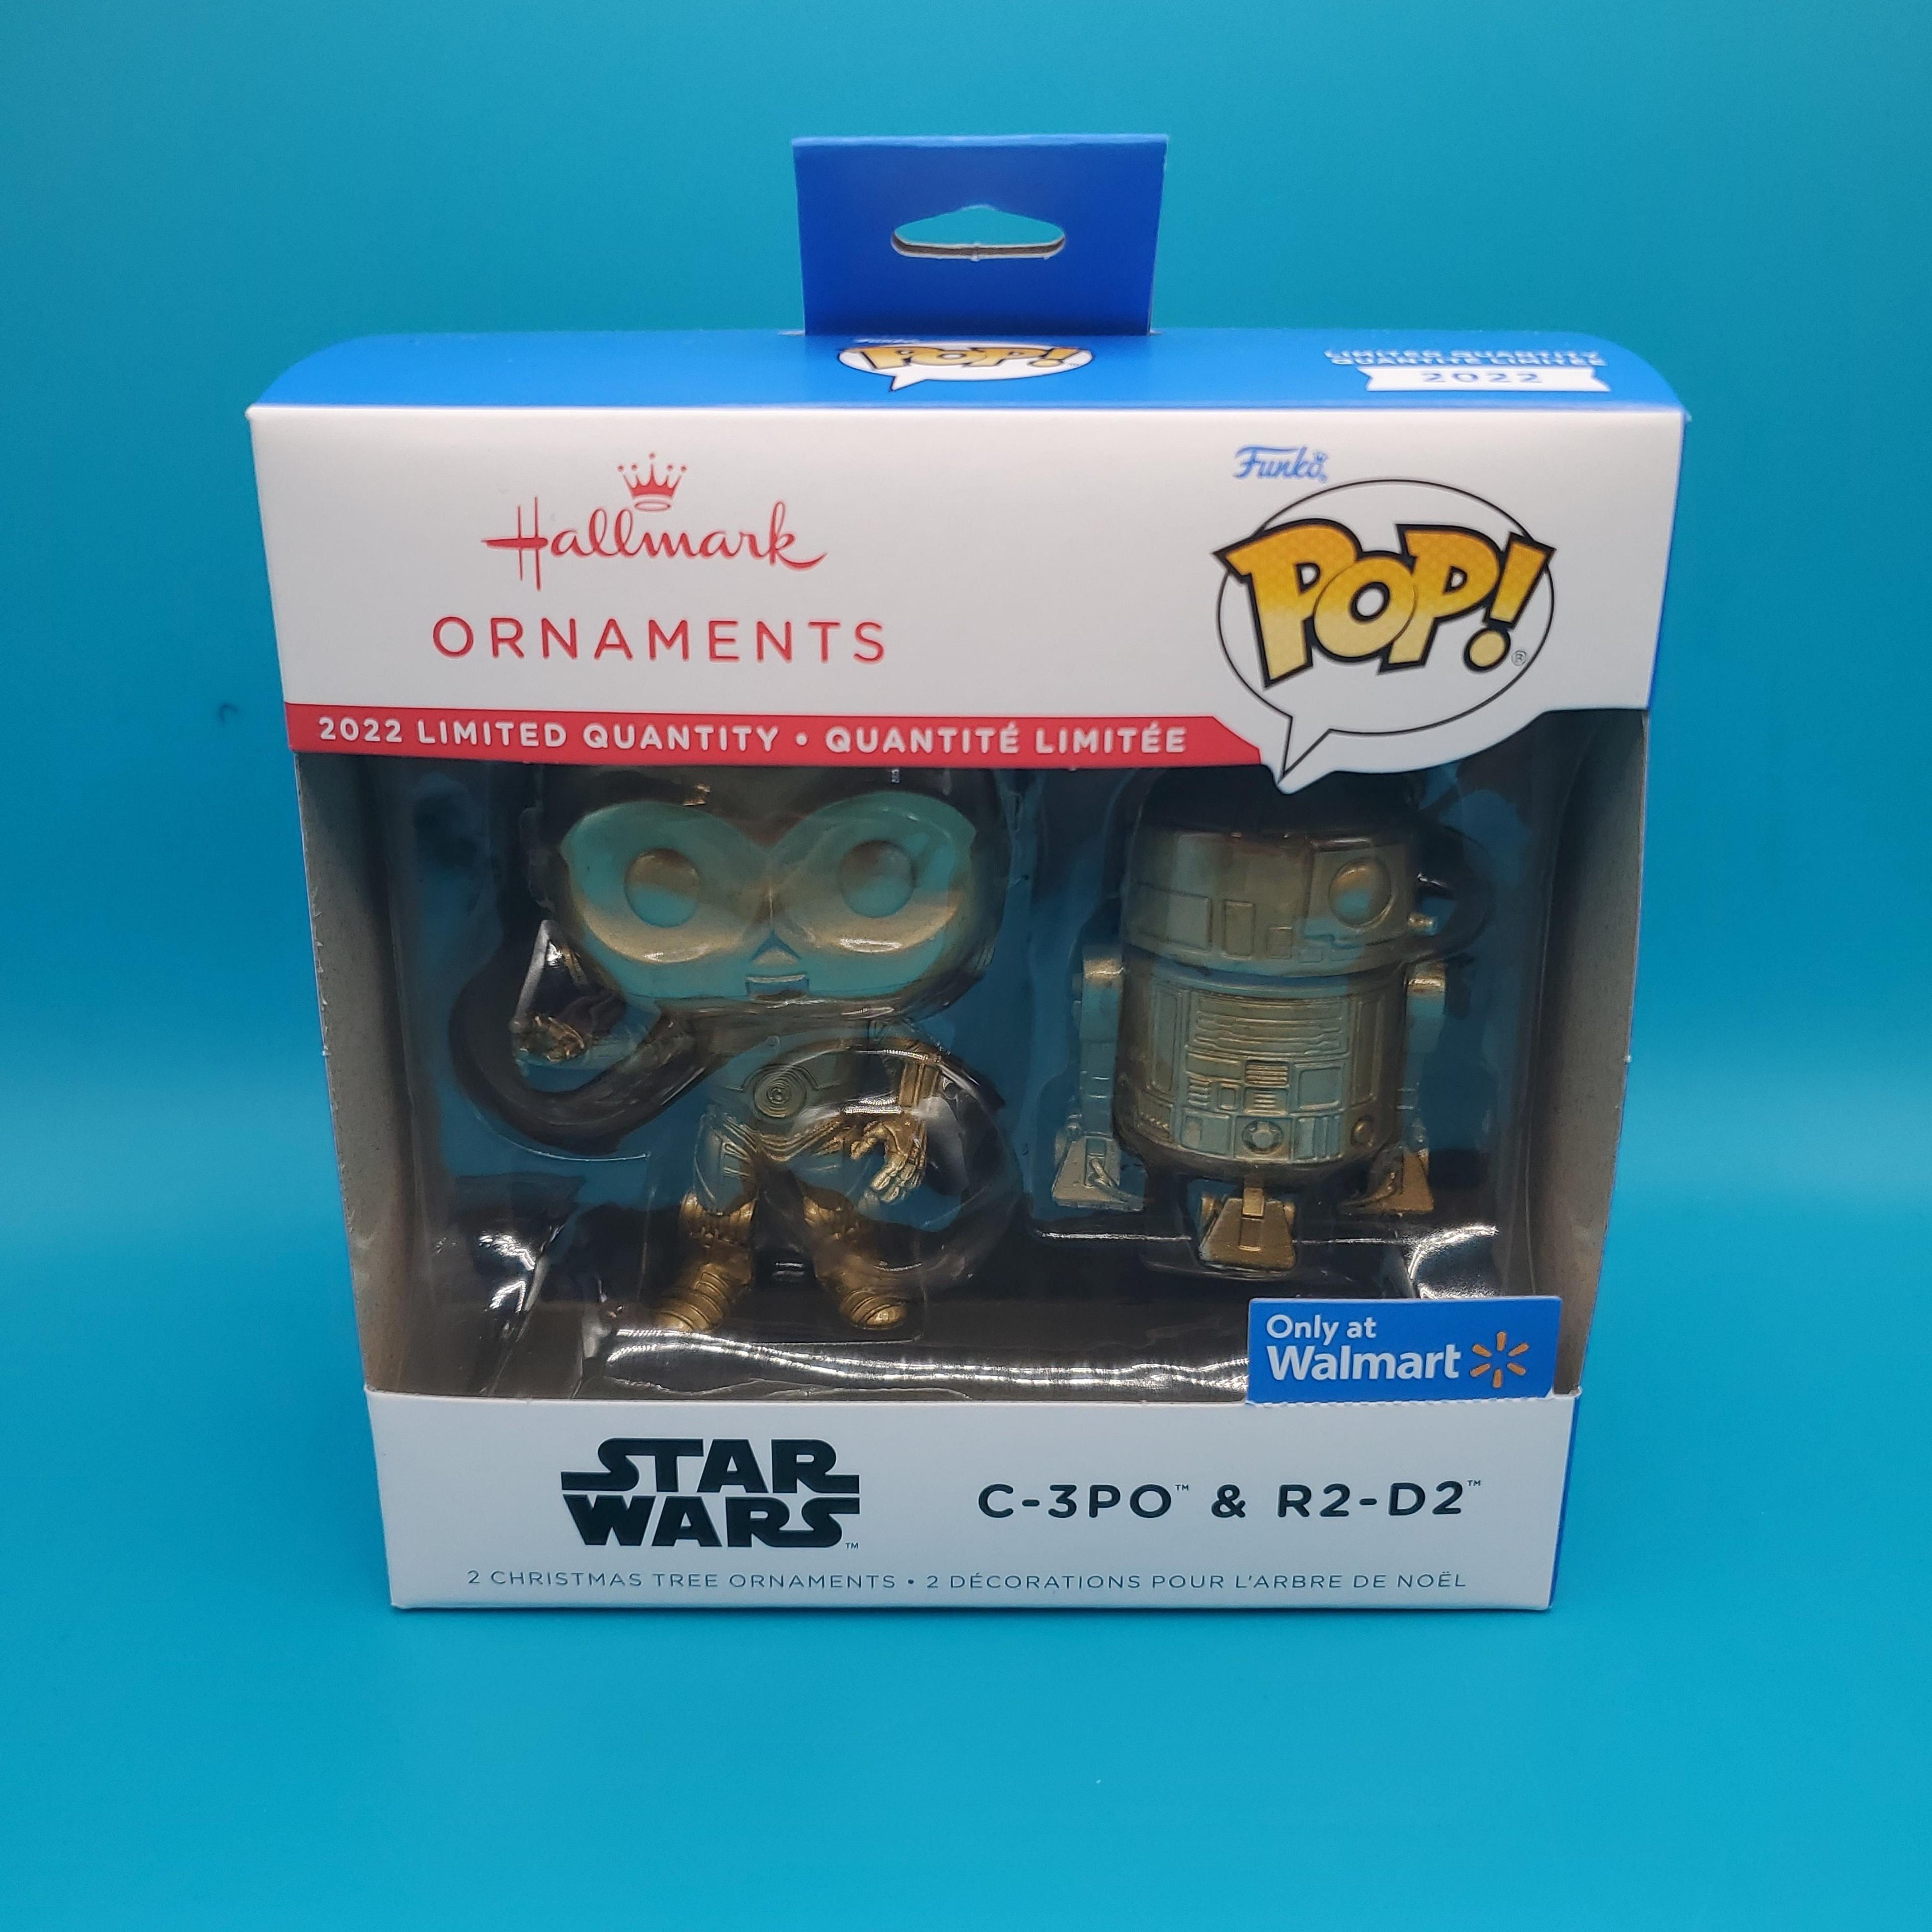 C-3PO and R2-D2 - Star Wars - Chase - Ornaments - Walmart